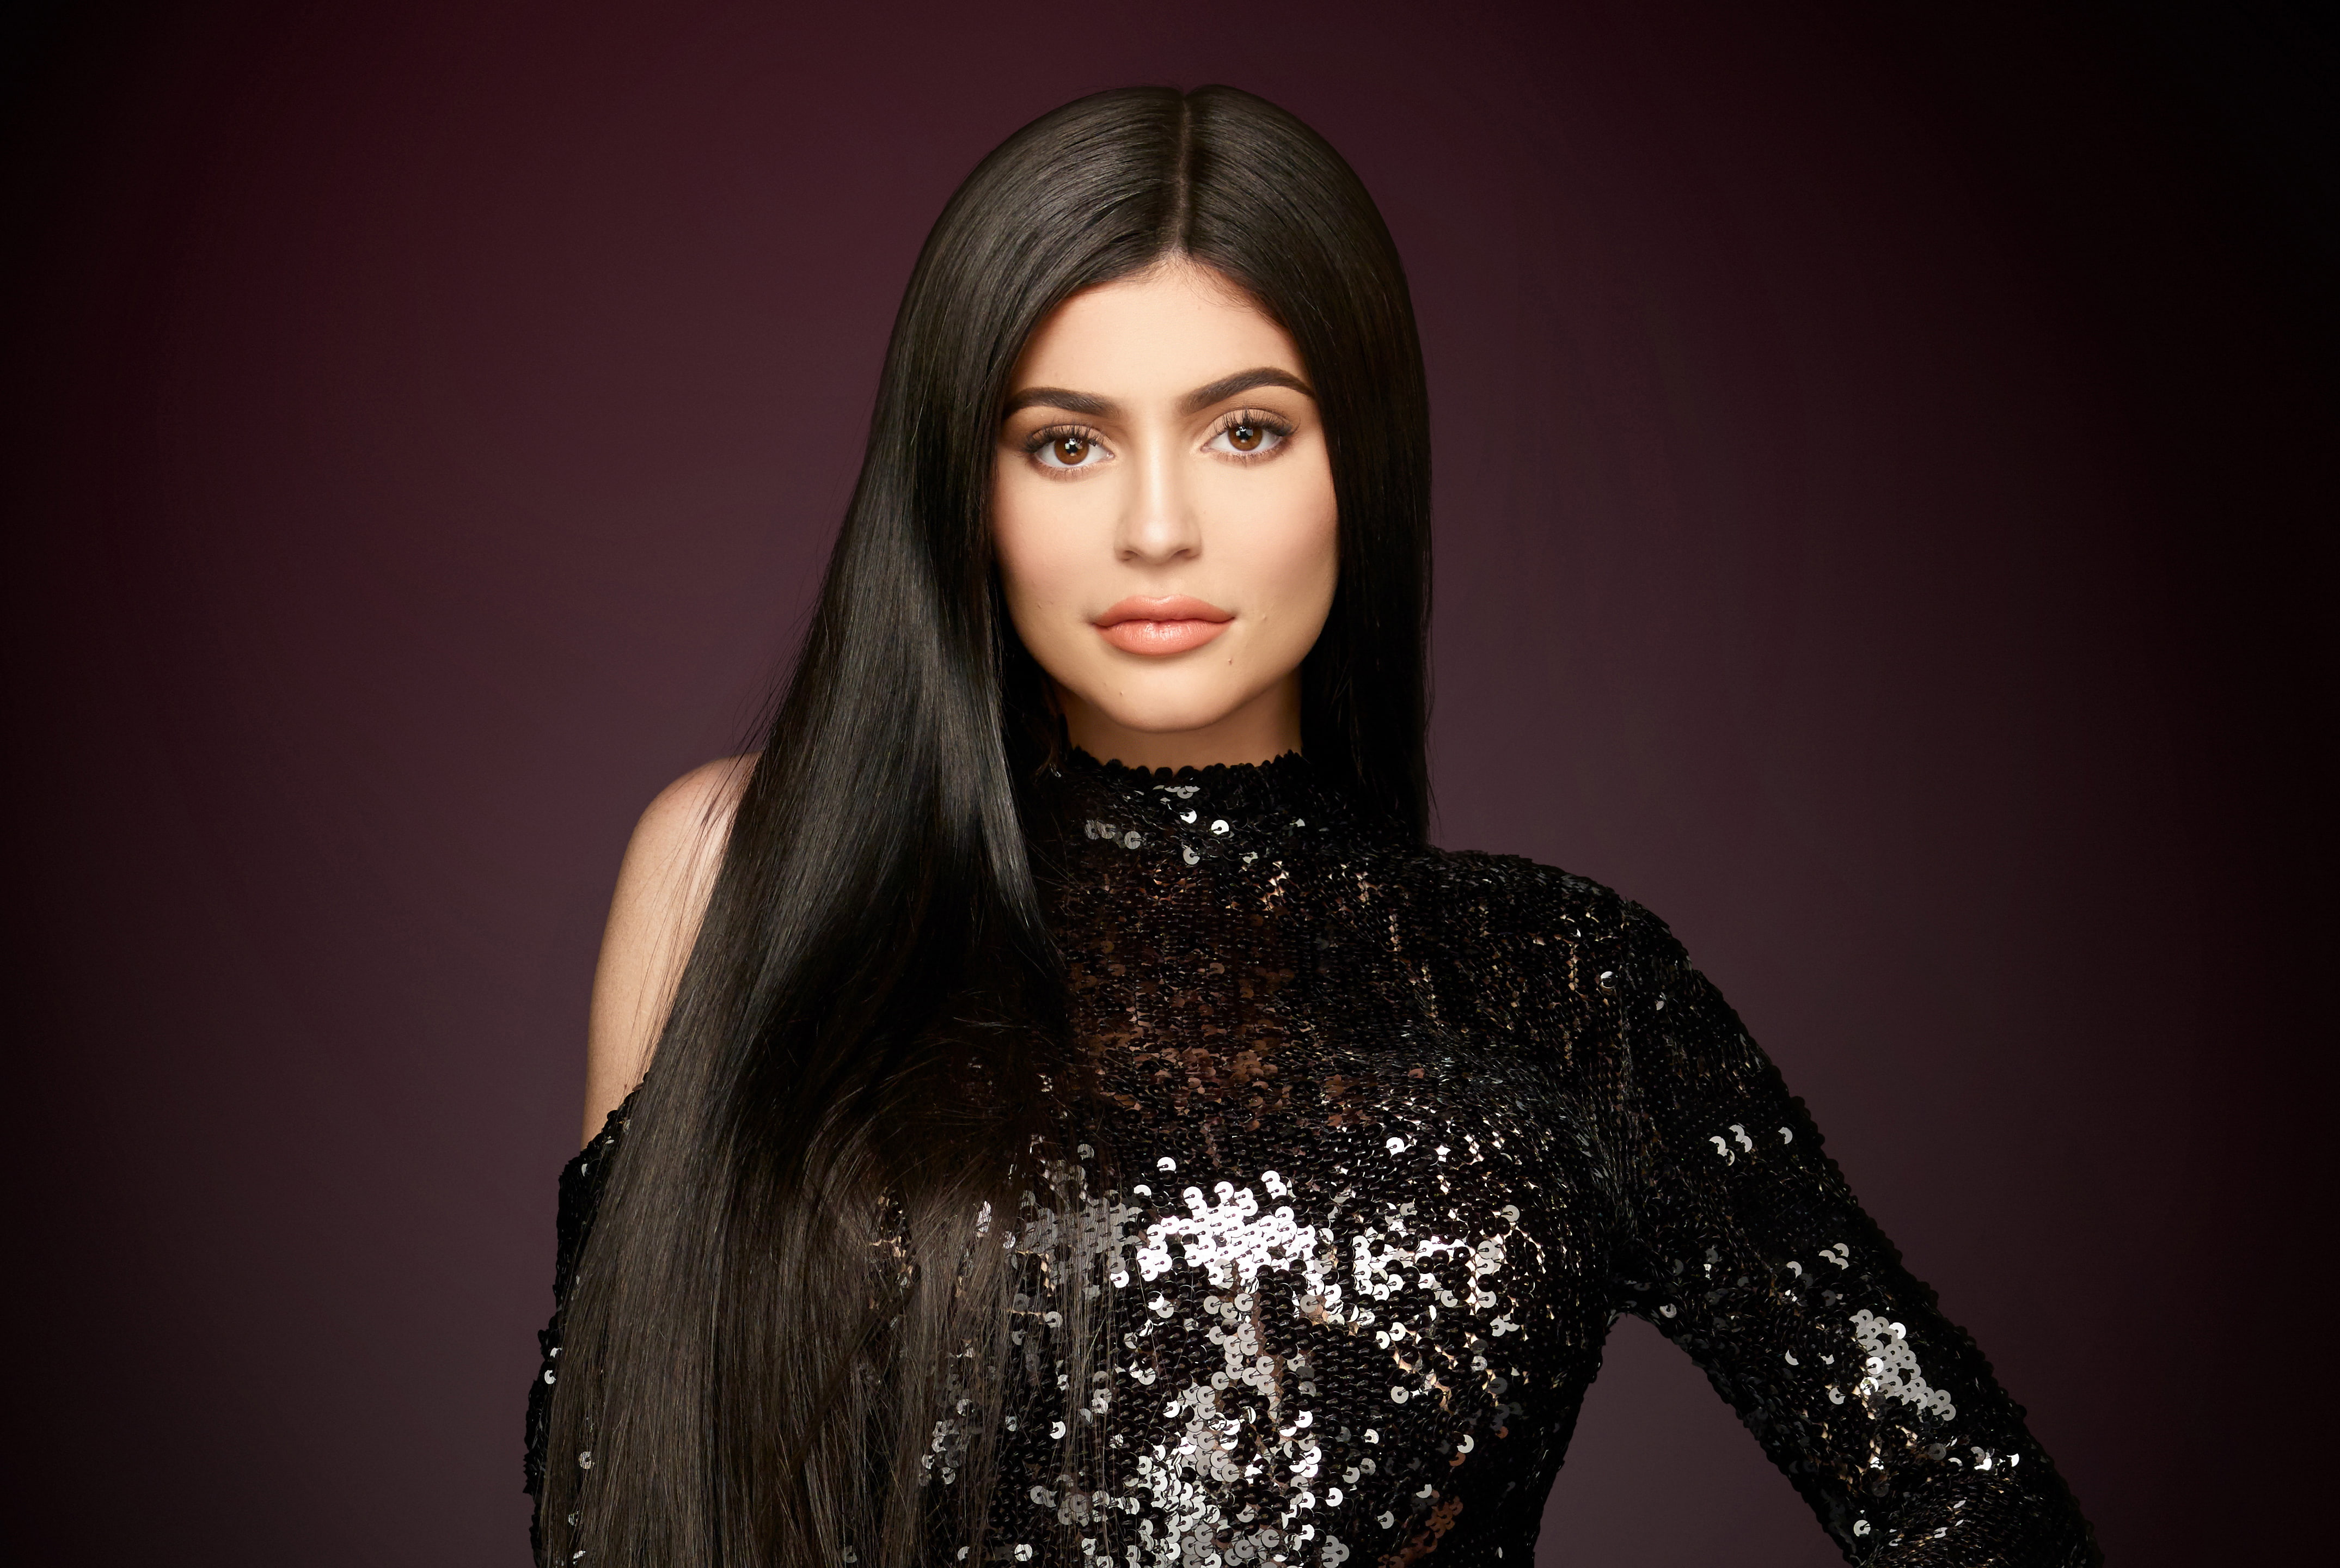 Kylie Jenner portrait, Keeping Up with the Kardashians, 4K, 2017